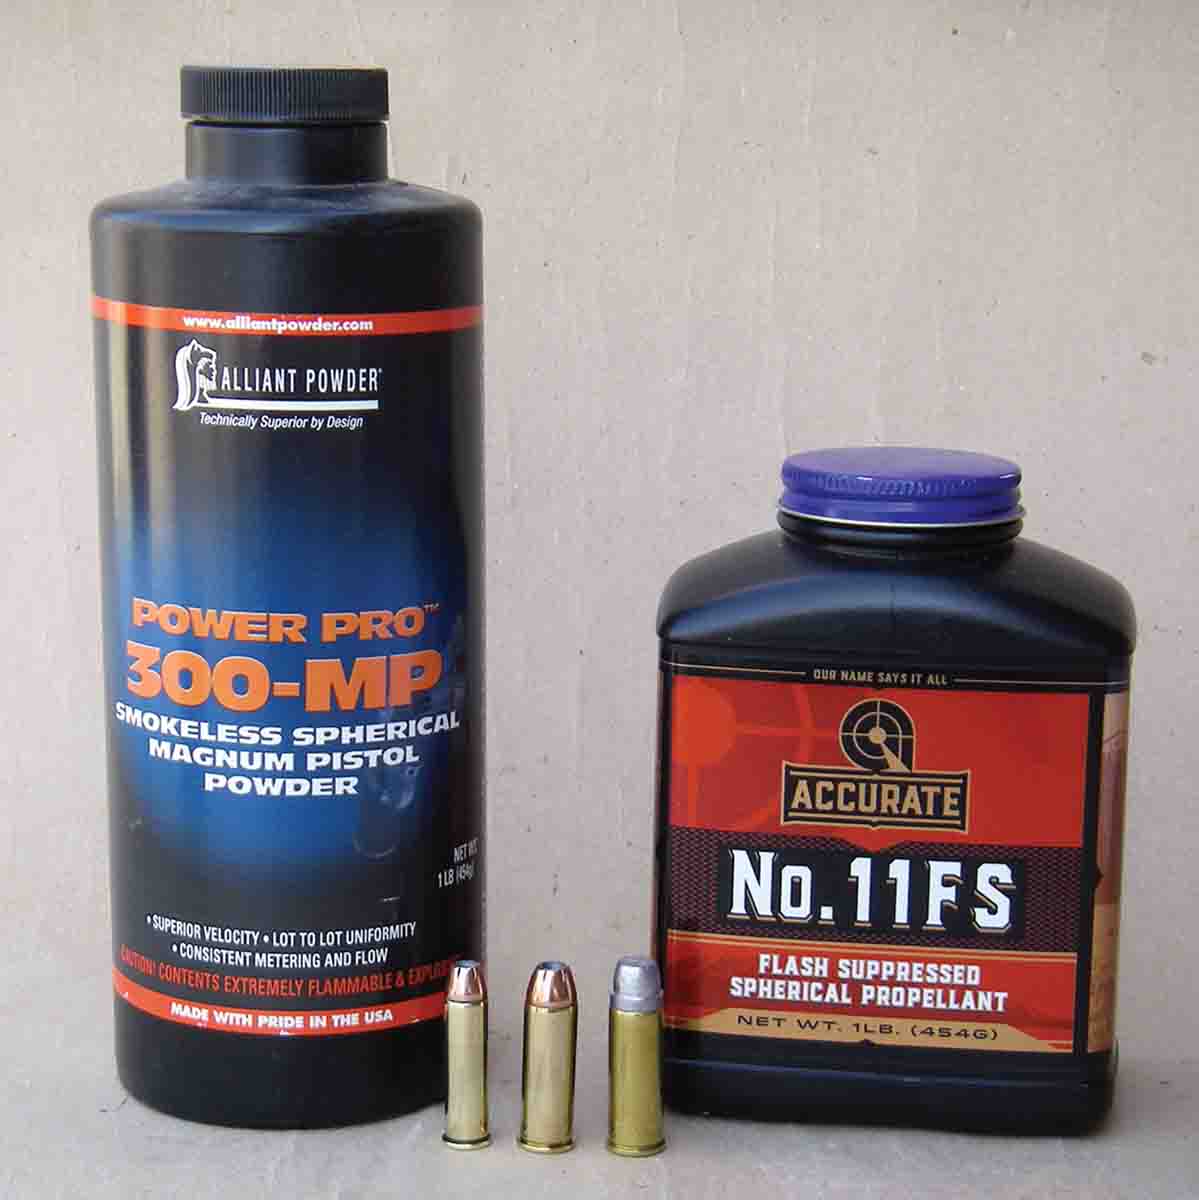 Alliant Power Pro 300-MP and Accurate No. 11FS are excellent powders for .357 and .44 Magnum and +P-style .45 Colt loads with either jacketed or cast bullets.